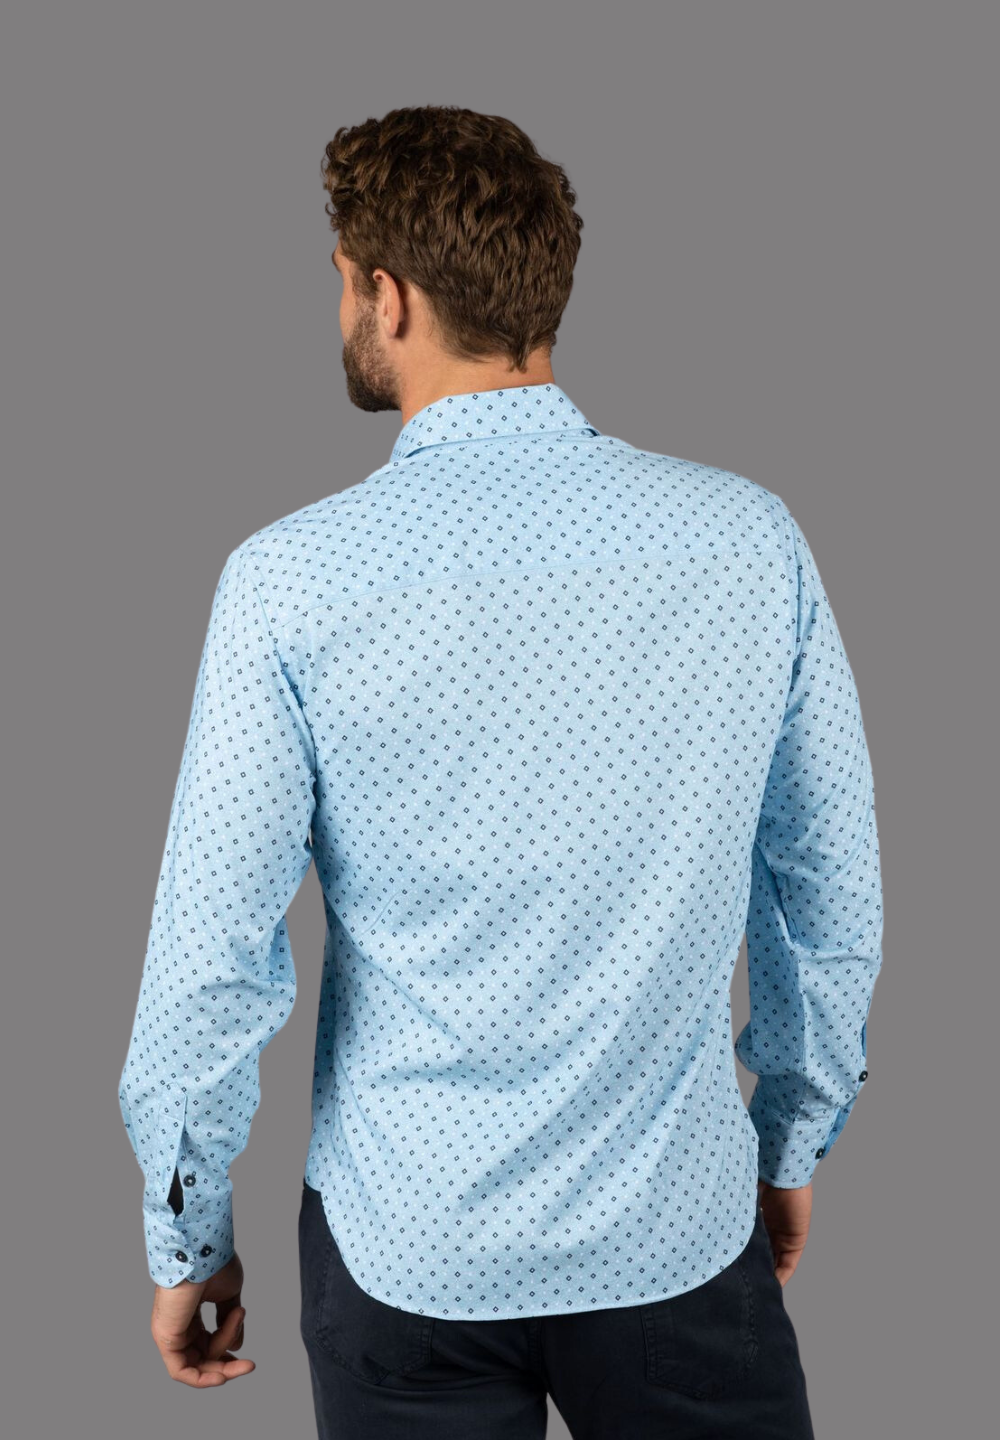 Powder Blue with Navy and White Box Shirt